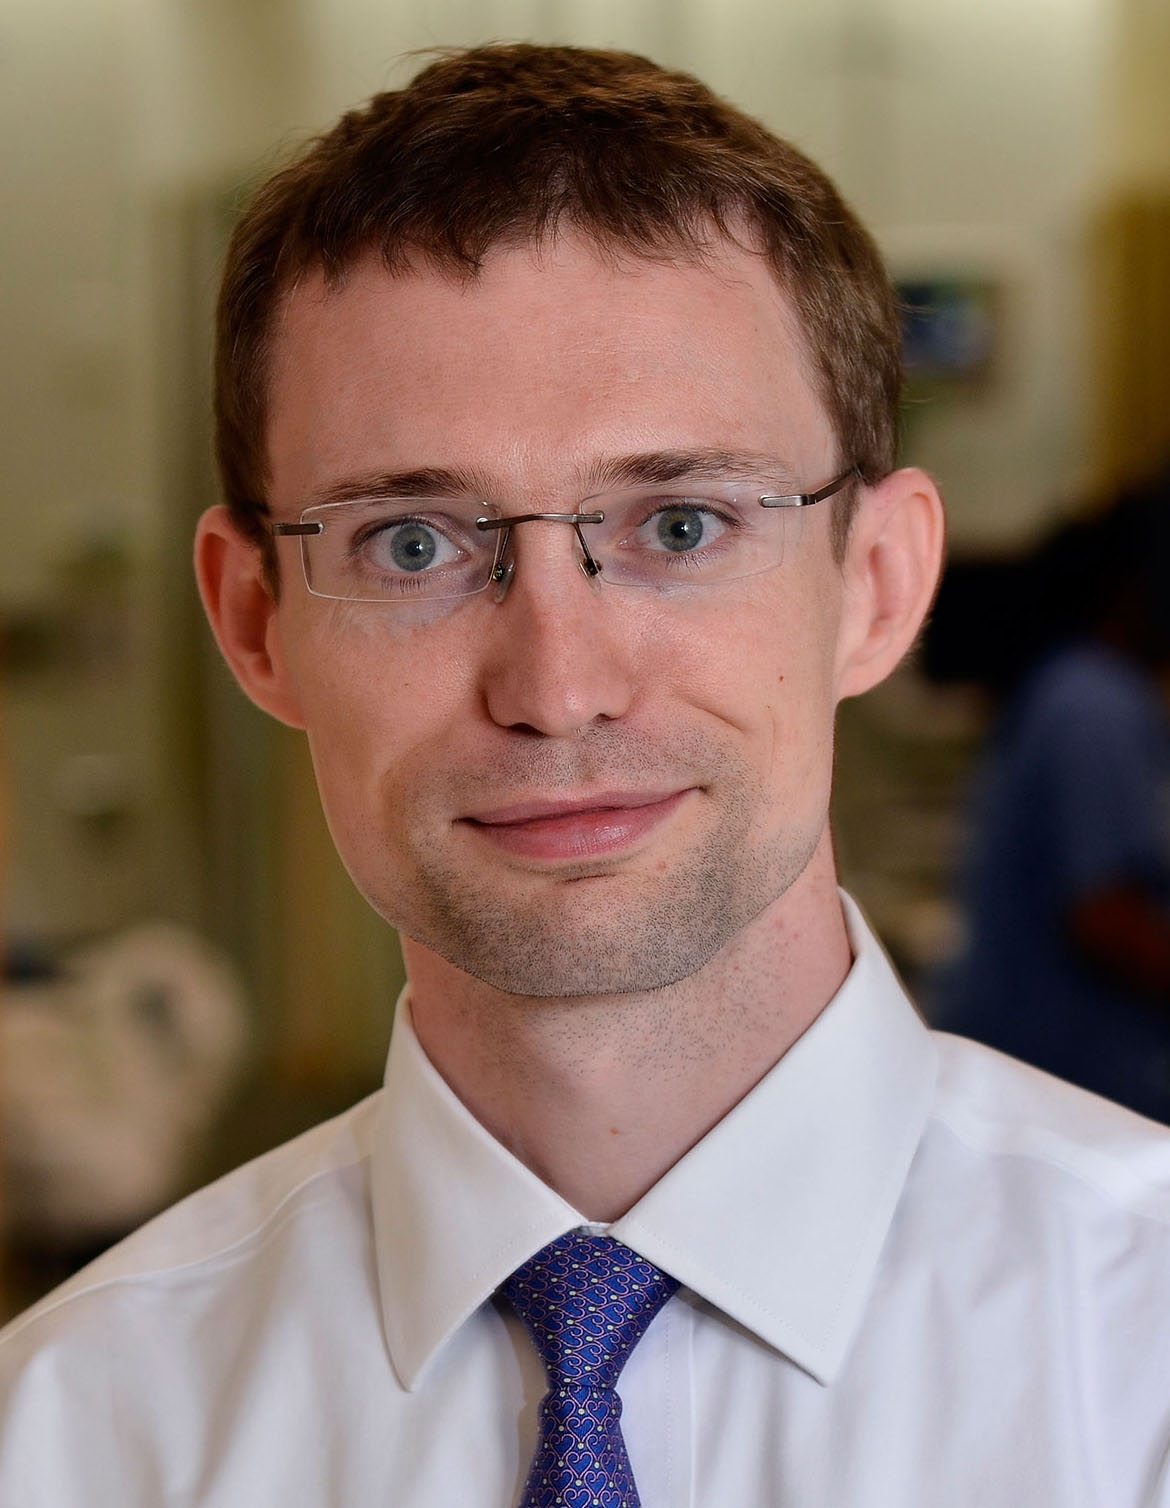 Image - Photo of Robert S. Griffin, MD, PhD